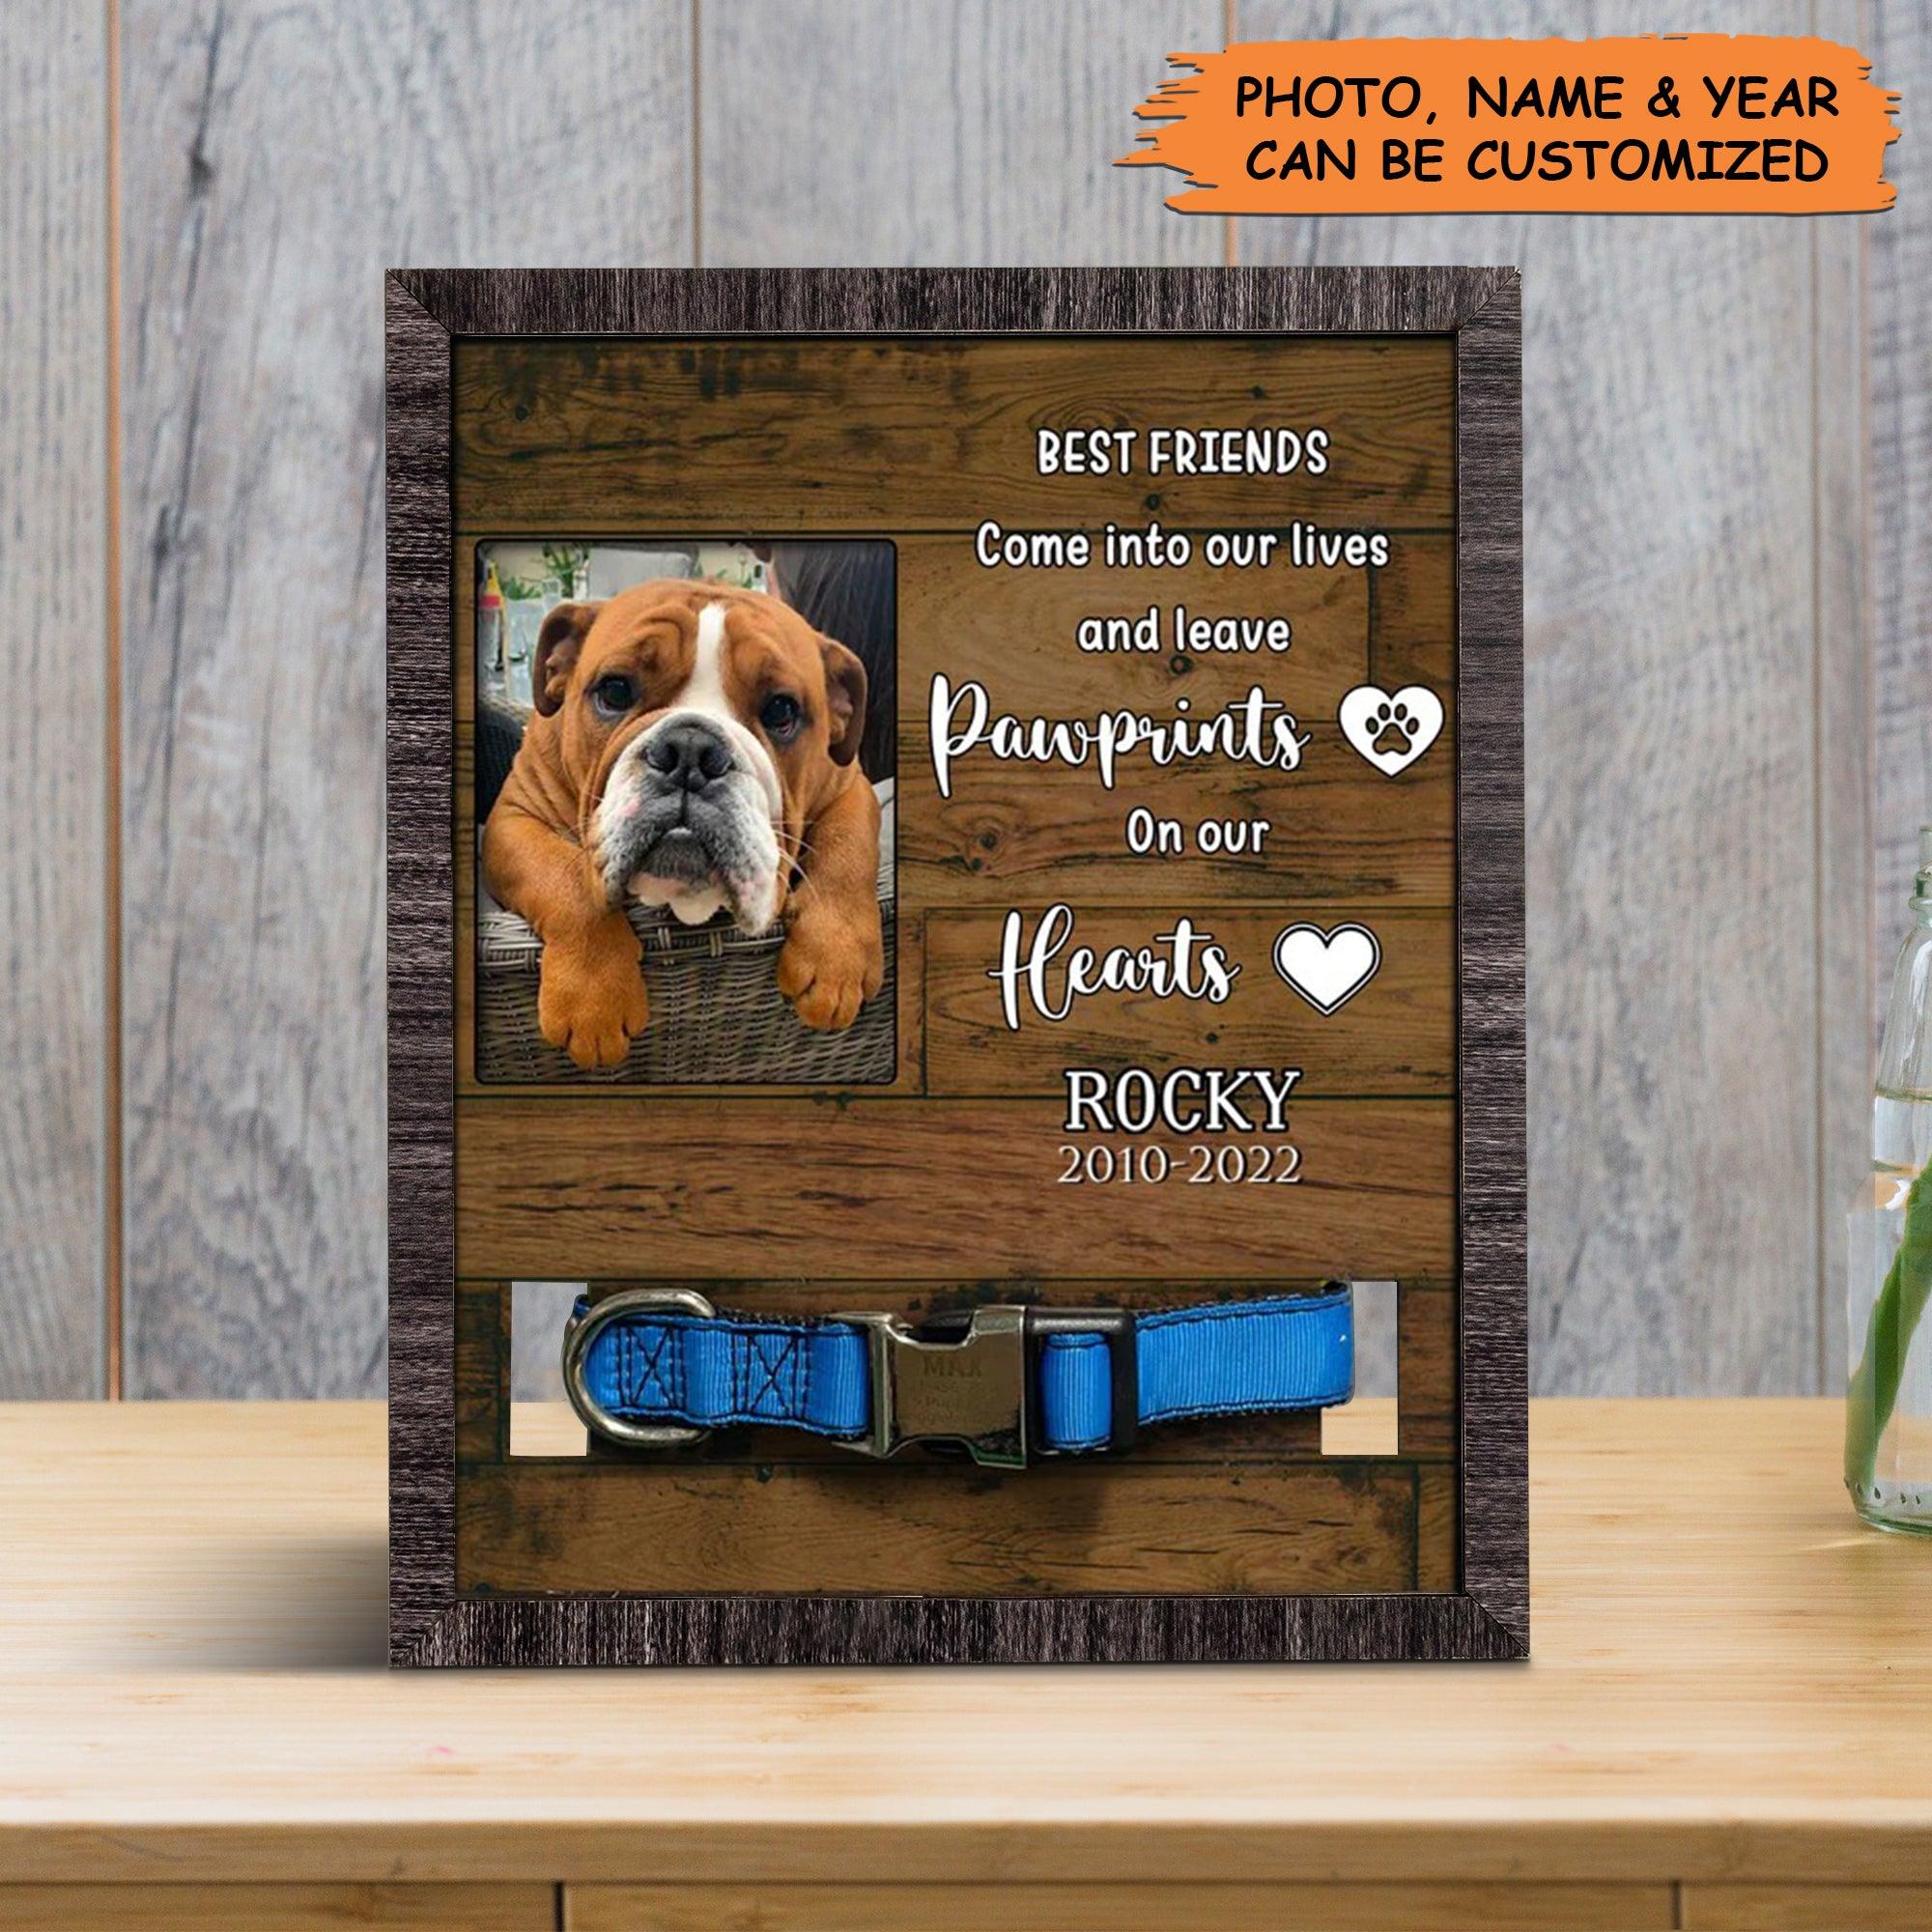 Personalized Pet Collar Frame - Customized Picture Frame Loss Of Bulldog, Dog Remembrance, Memorial Custom Collar Frame - Gift For Grieving Pet Owner - Amzanimalsgift